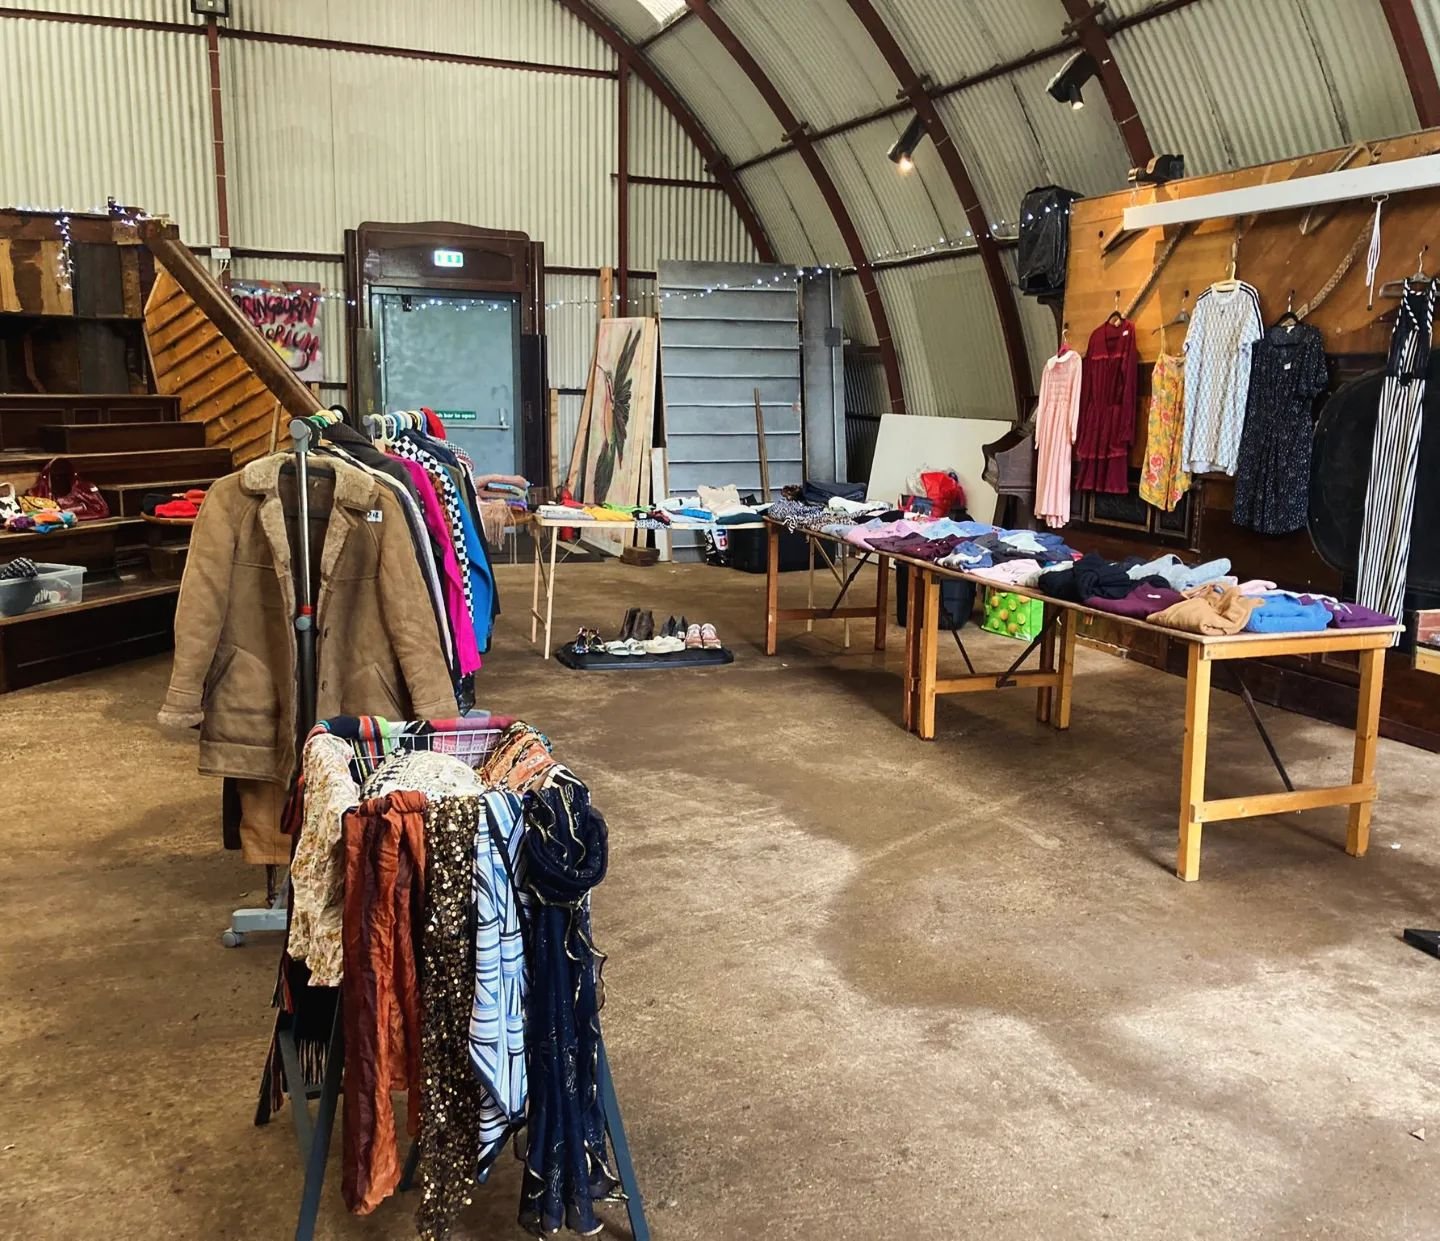 Come along to our second-hand market at Springburn Auditorium this Saturday, 4th March, from 11am-3pm. Browse through a range of clothing, books, bric-a-brac and learn about our unique upcycled community venue. 📚🛍👕👖👛👗🎩 You are welcome to stay 